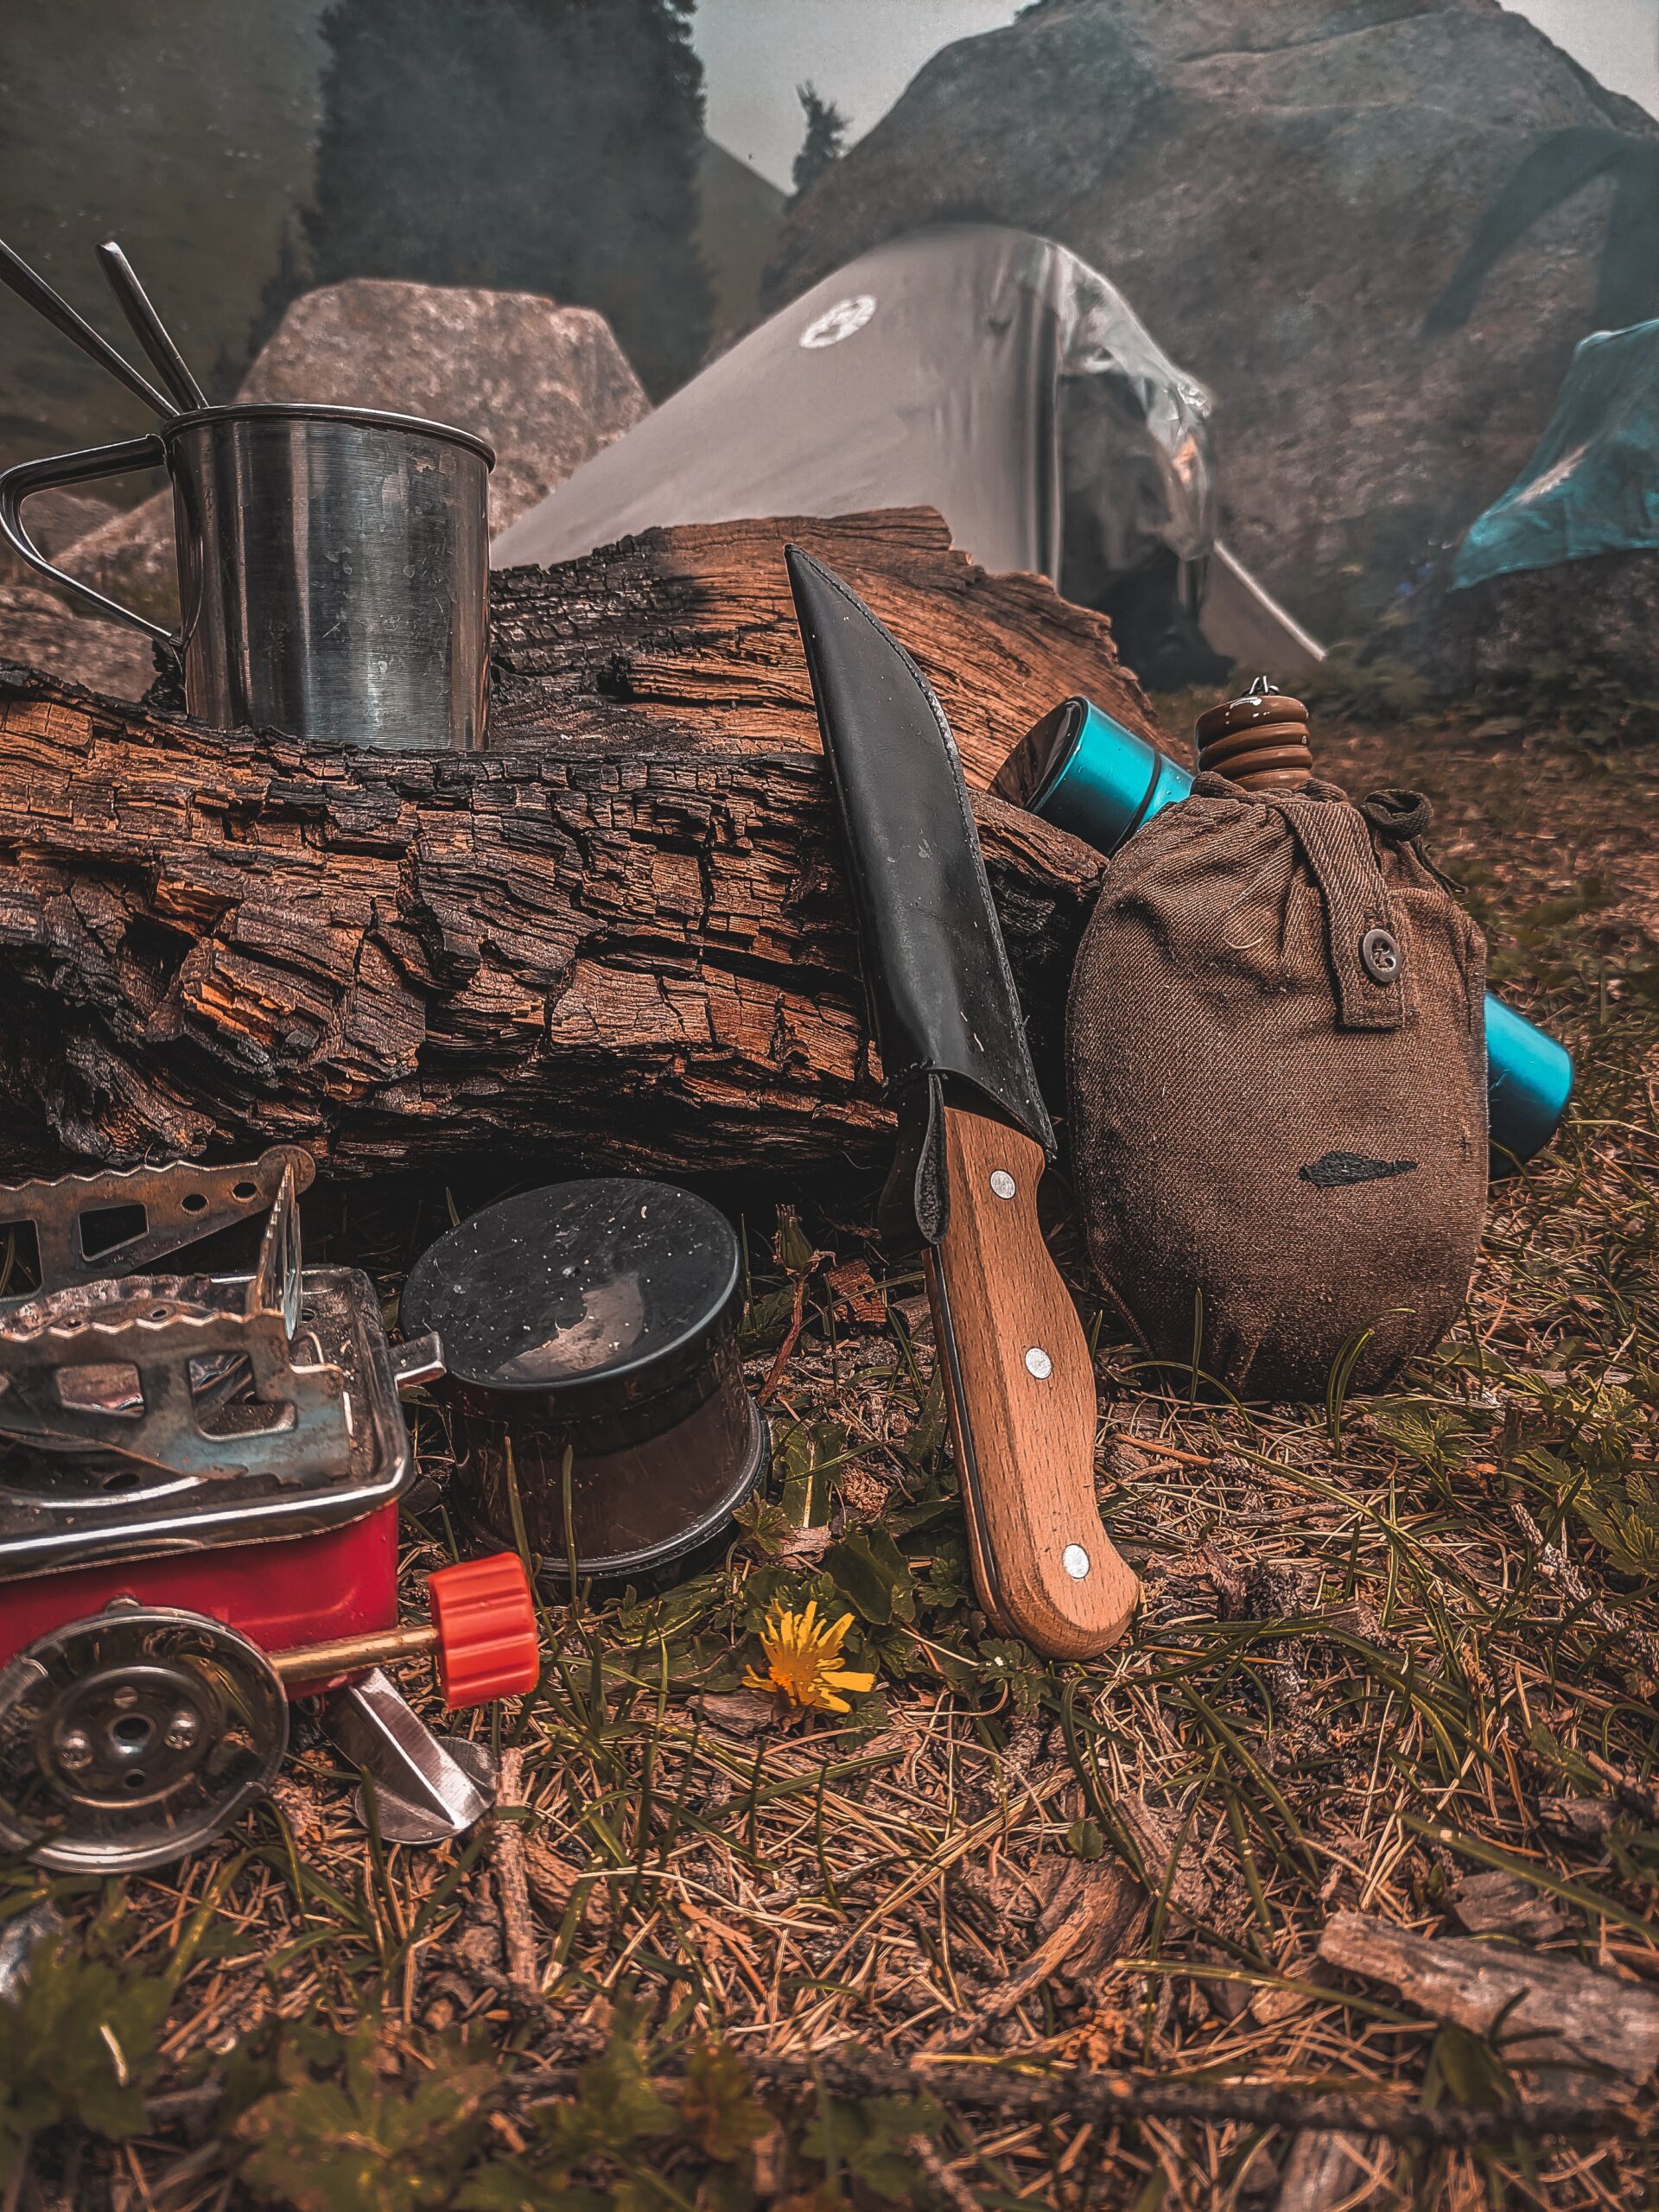 10 Essential Items to Pack for Your Next Camping Trip